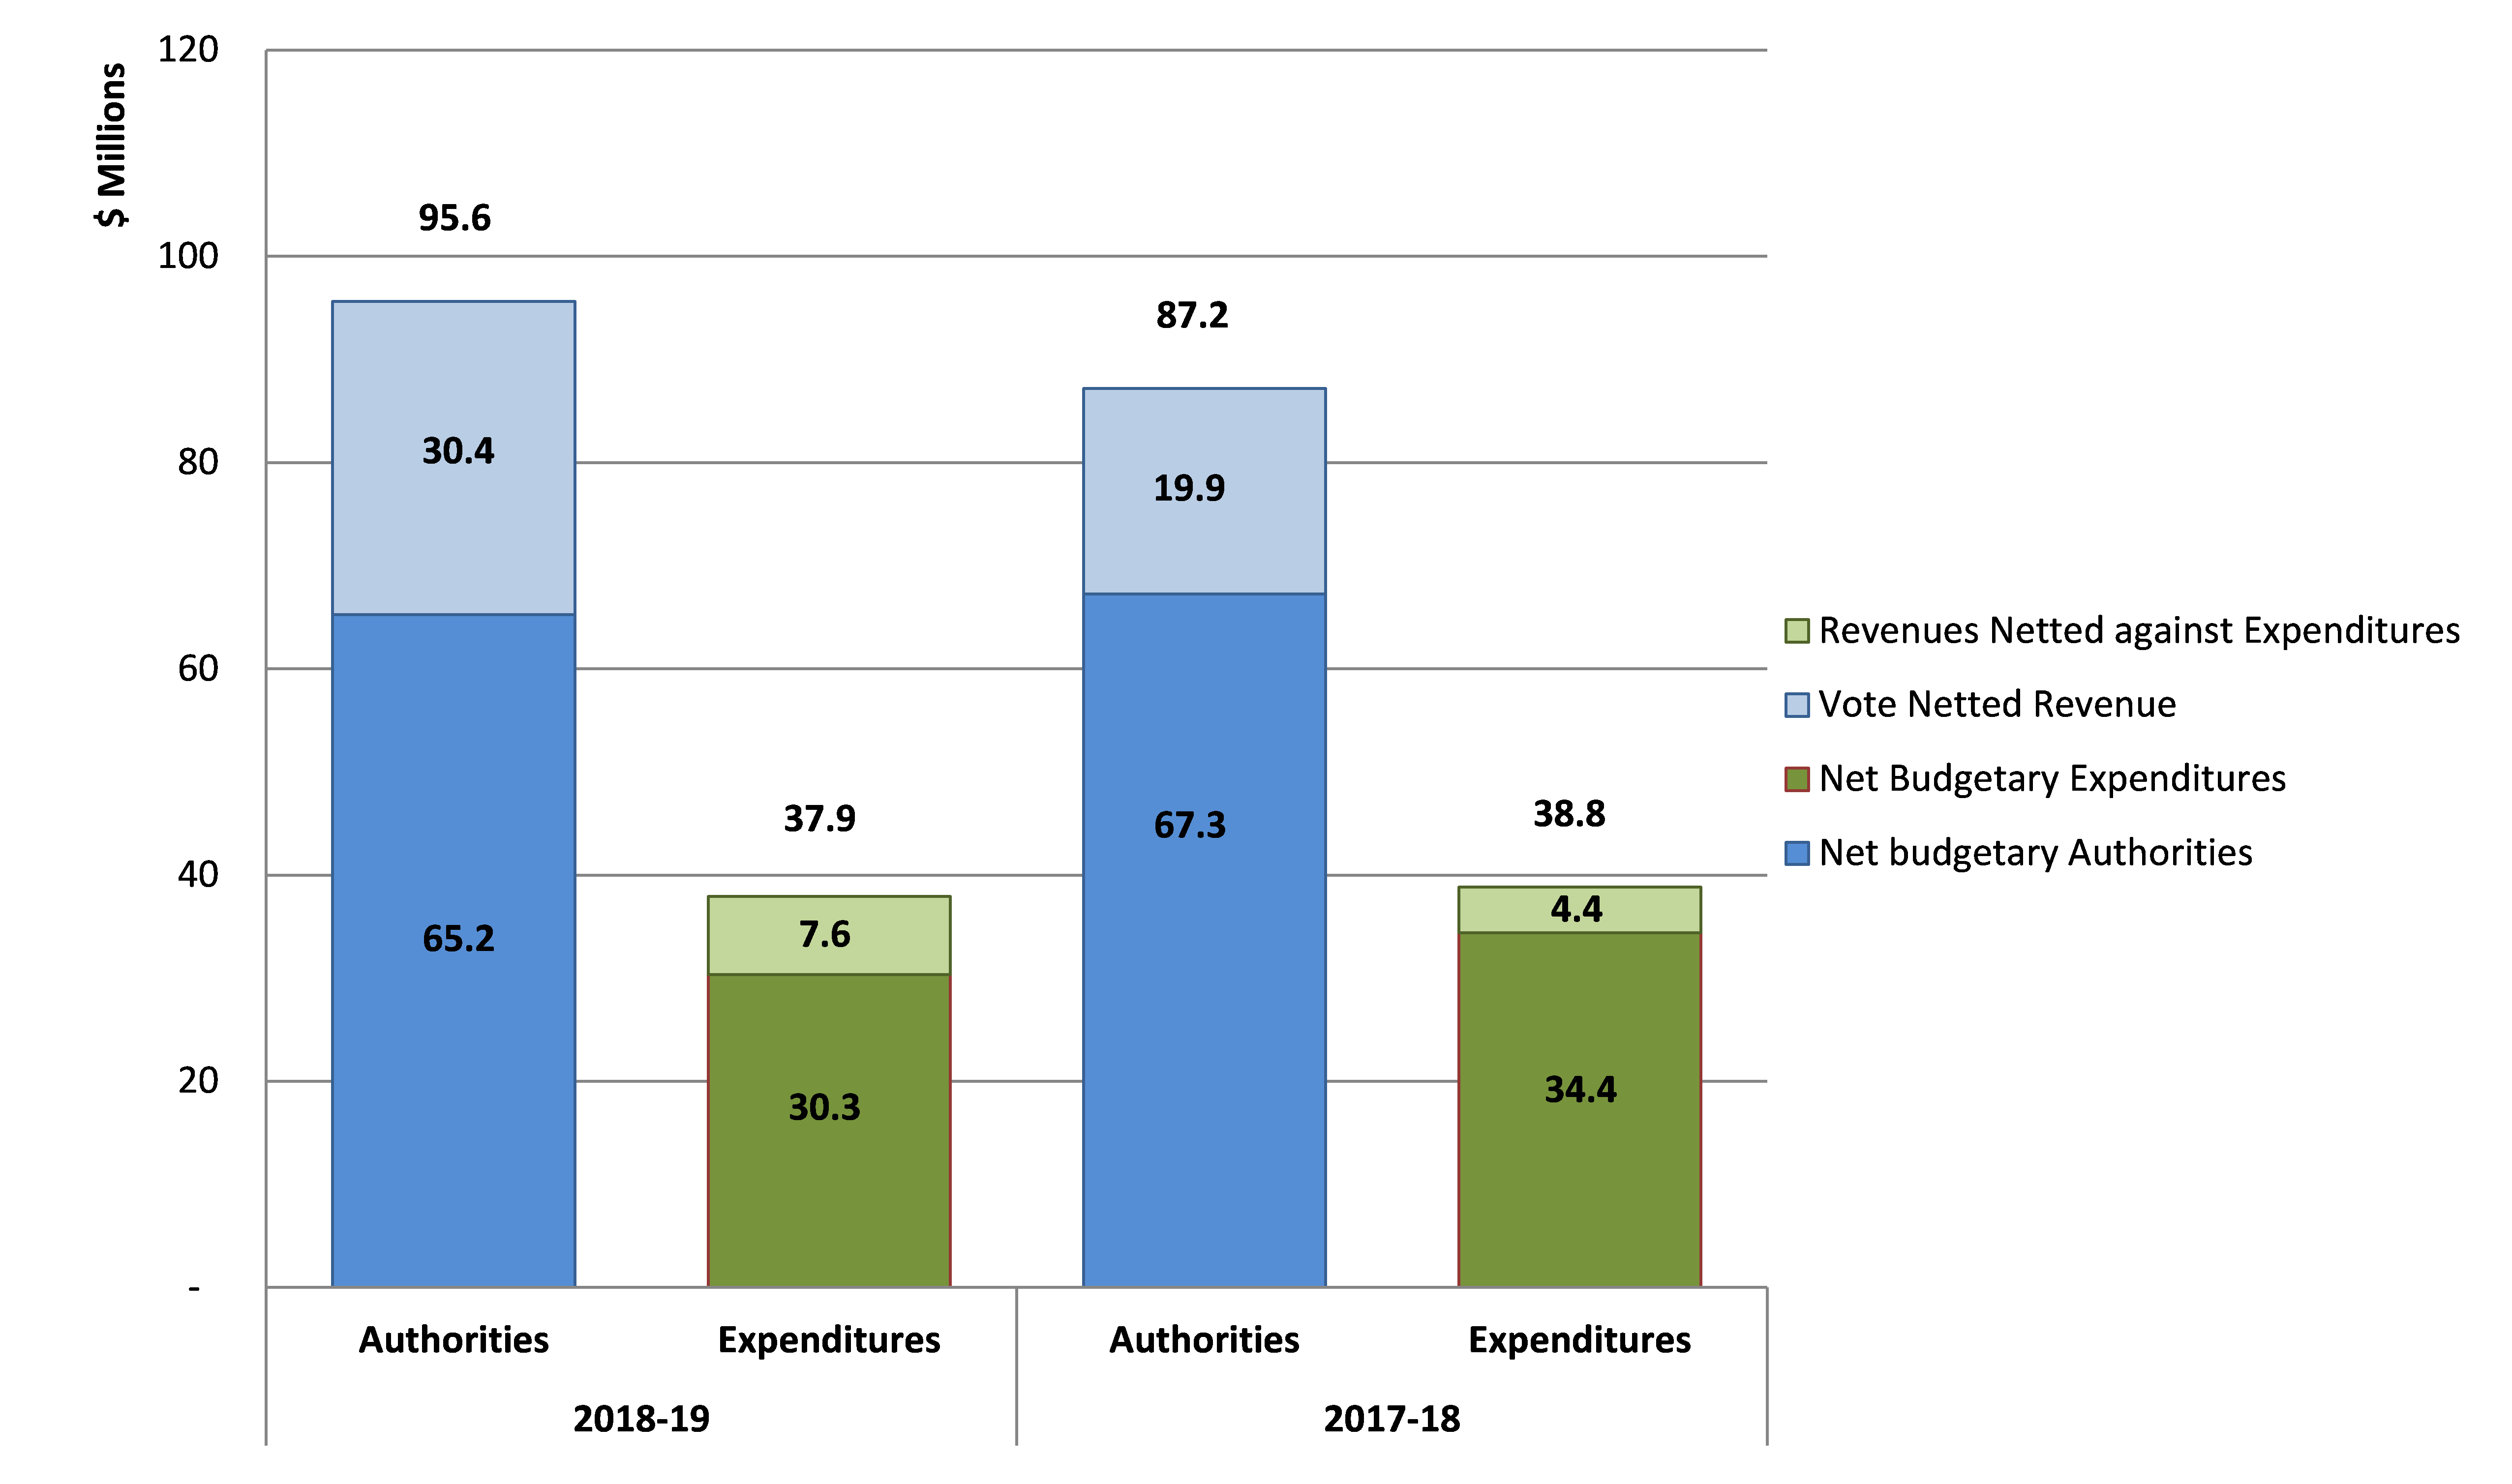 Graph 1: Comparison of budgetary authorities and expenditures for the quarters ended September 30, 2018, and September 30, 2017.